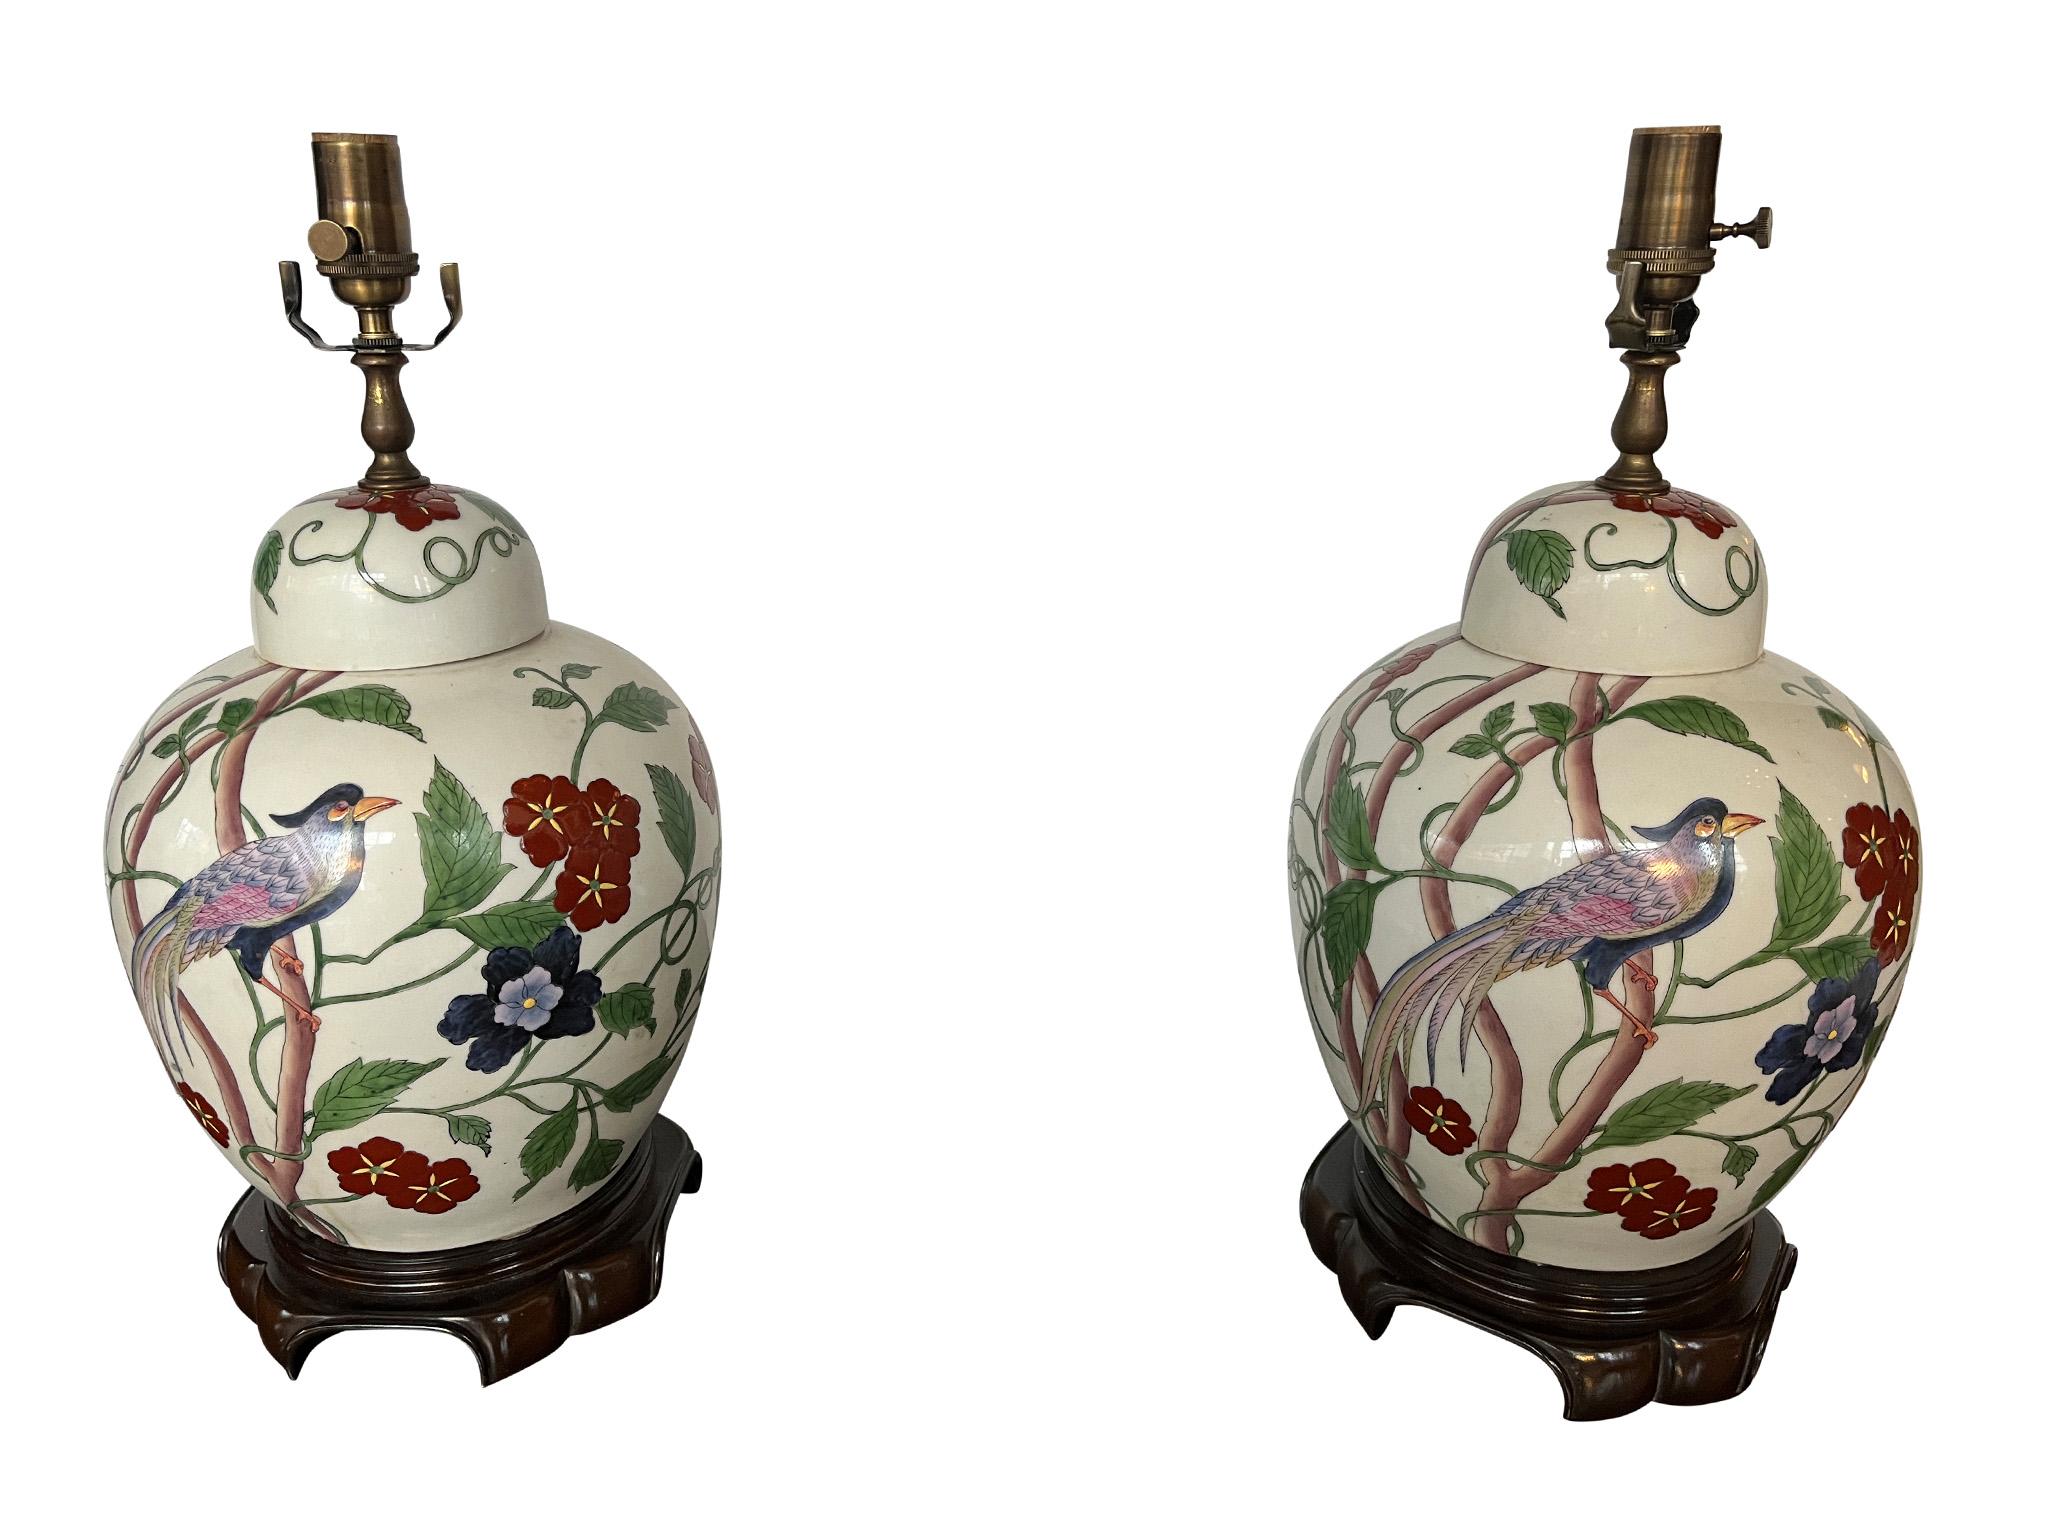 Lovely pair of vintage Chinese table lamps, crafted in porcelain sometime during the 20th century. Designed in a traditional ginger jar shape with a tall brass finial, the lamps feature charming Birds of Paradise and flowering vines decoration. The